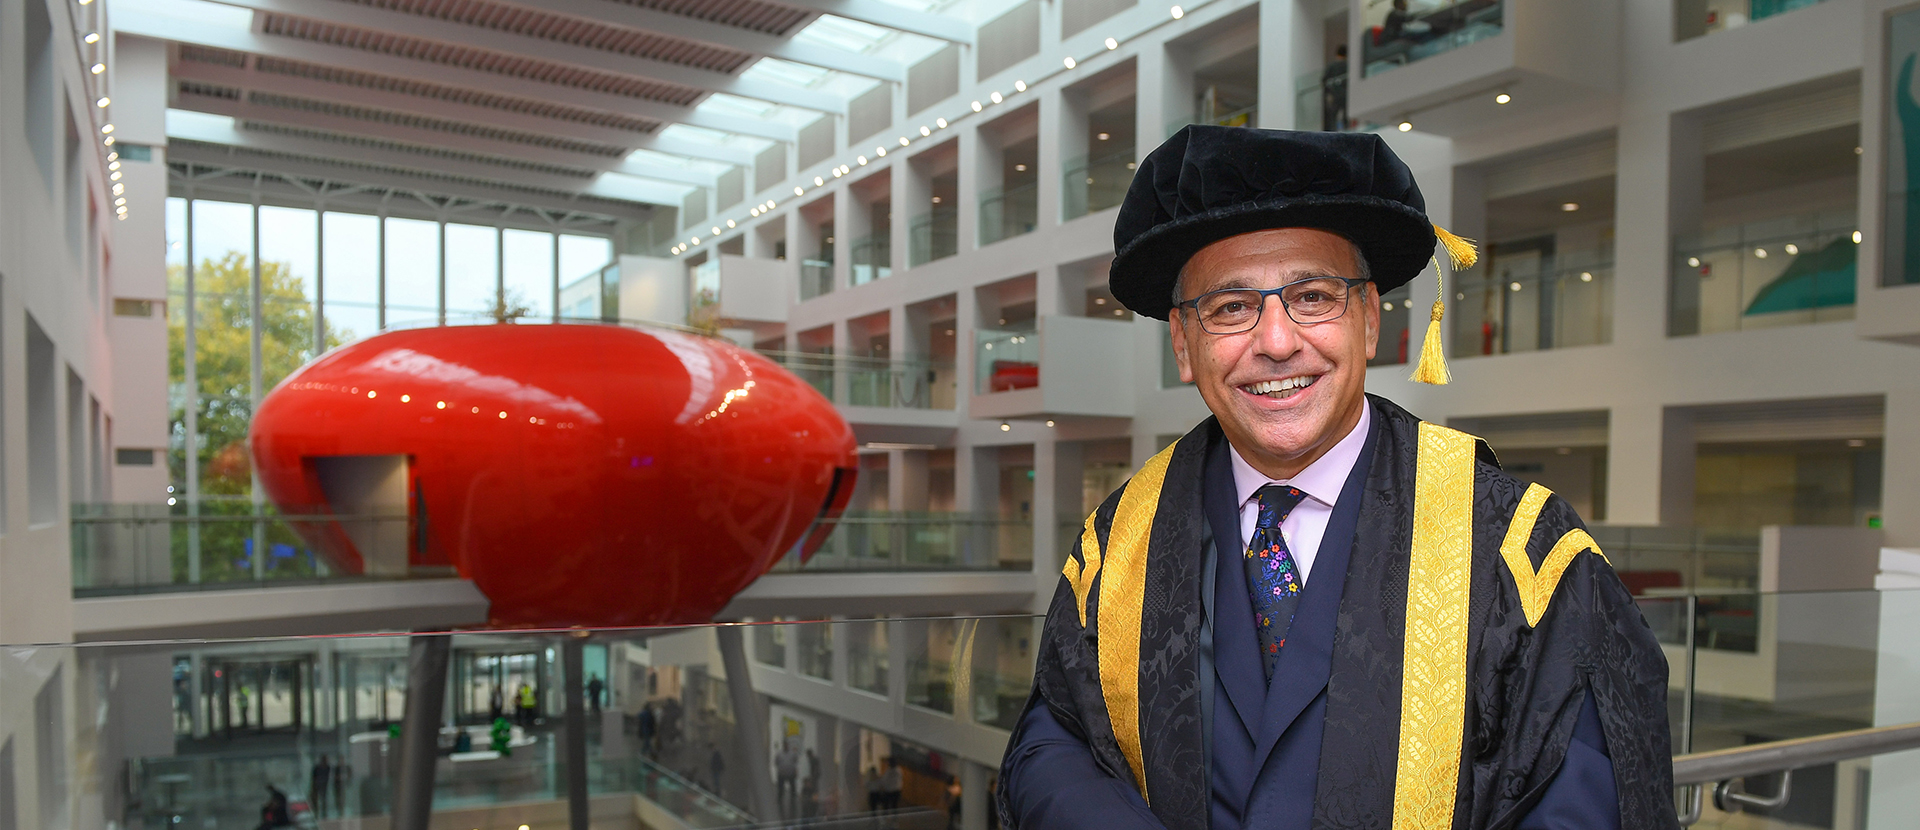 Theo Paphitis at his inauguration